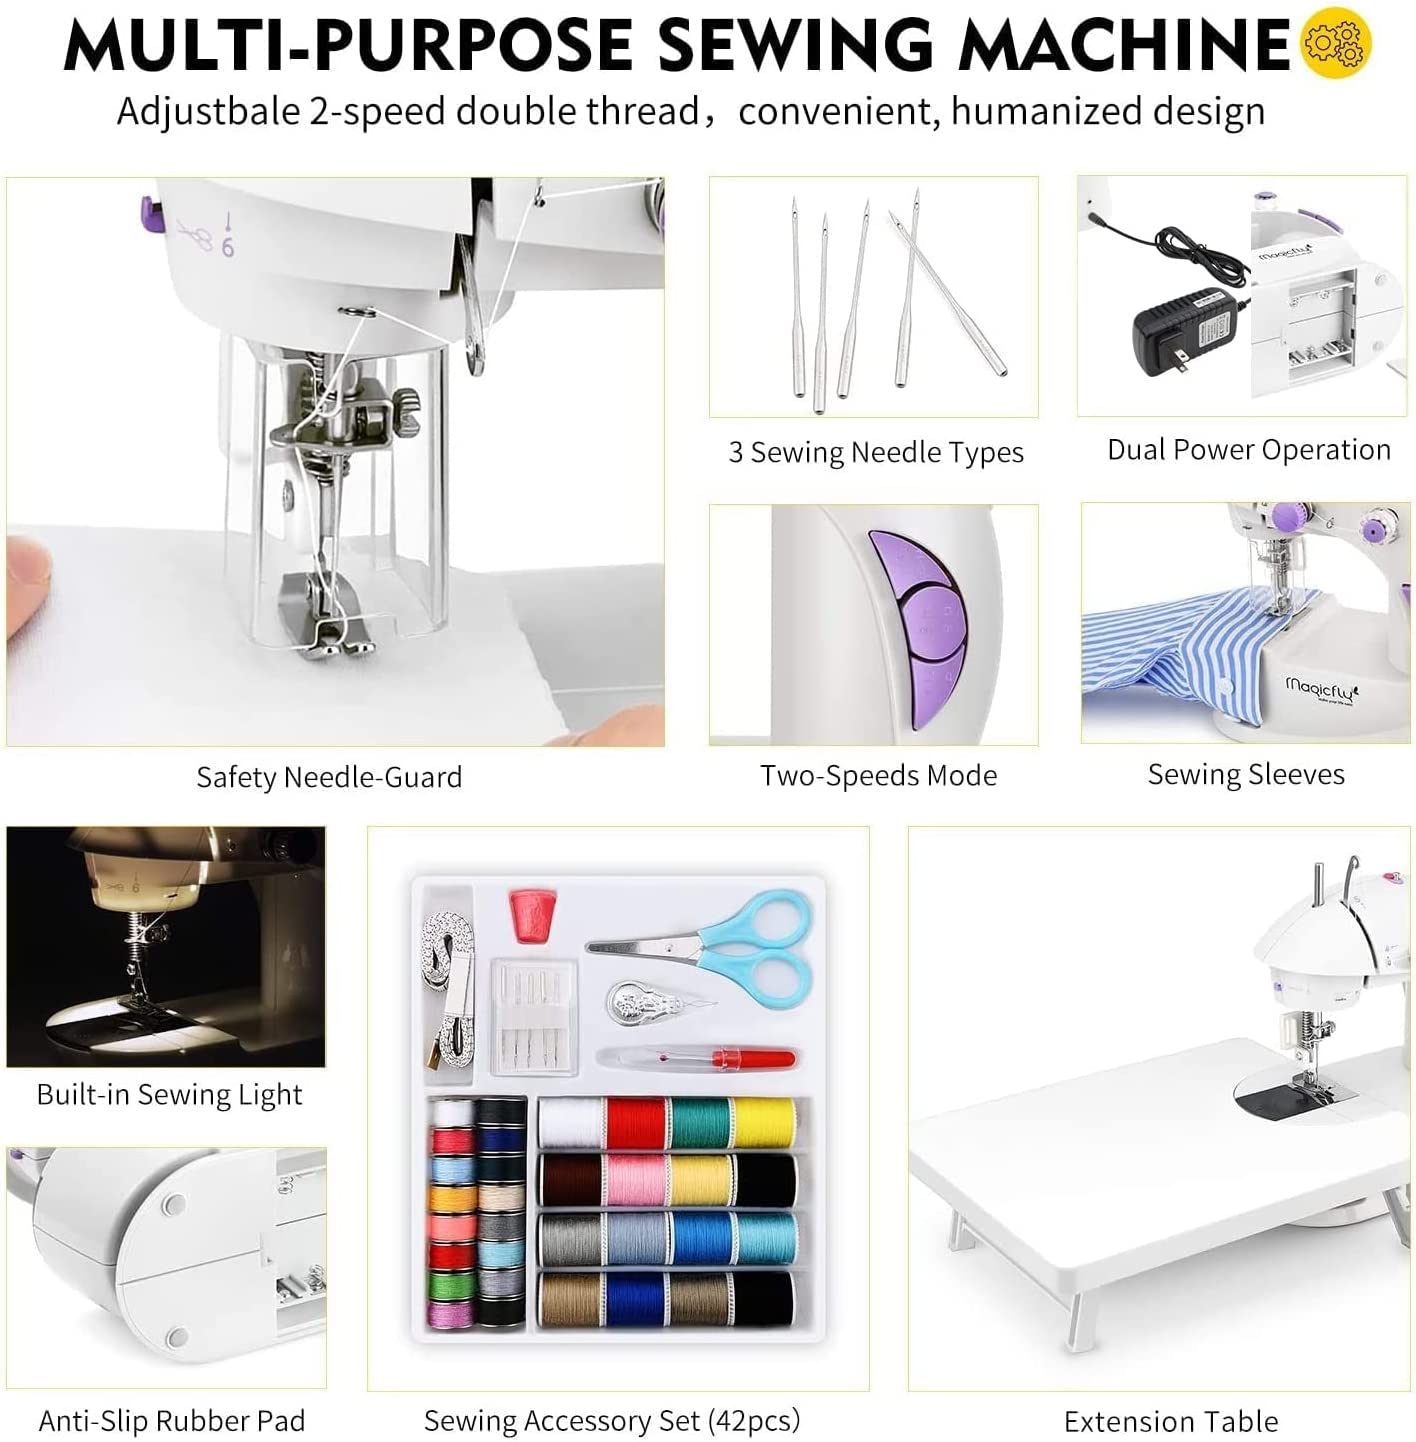 How to thread a mini sewing machine, how to get started